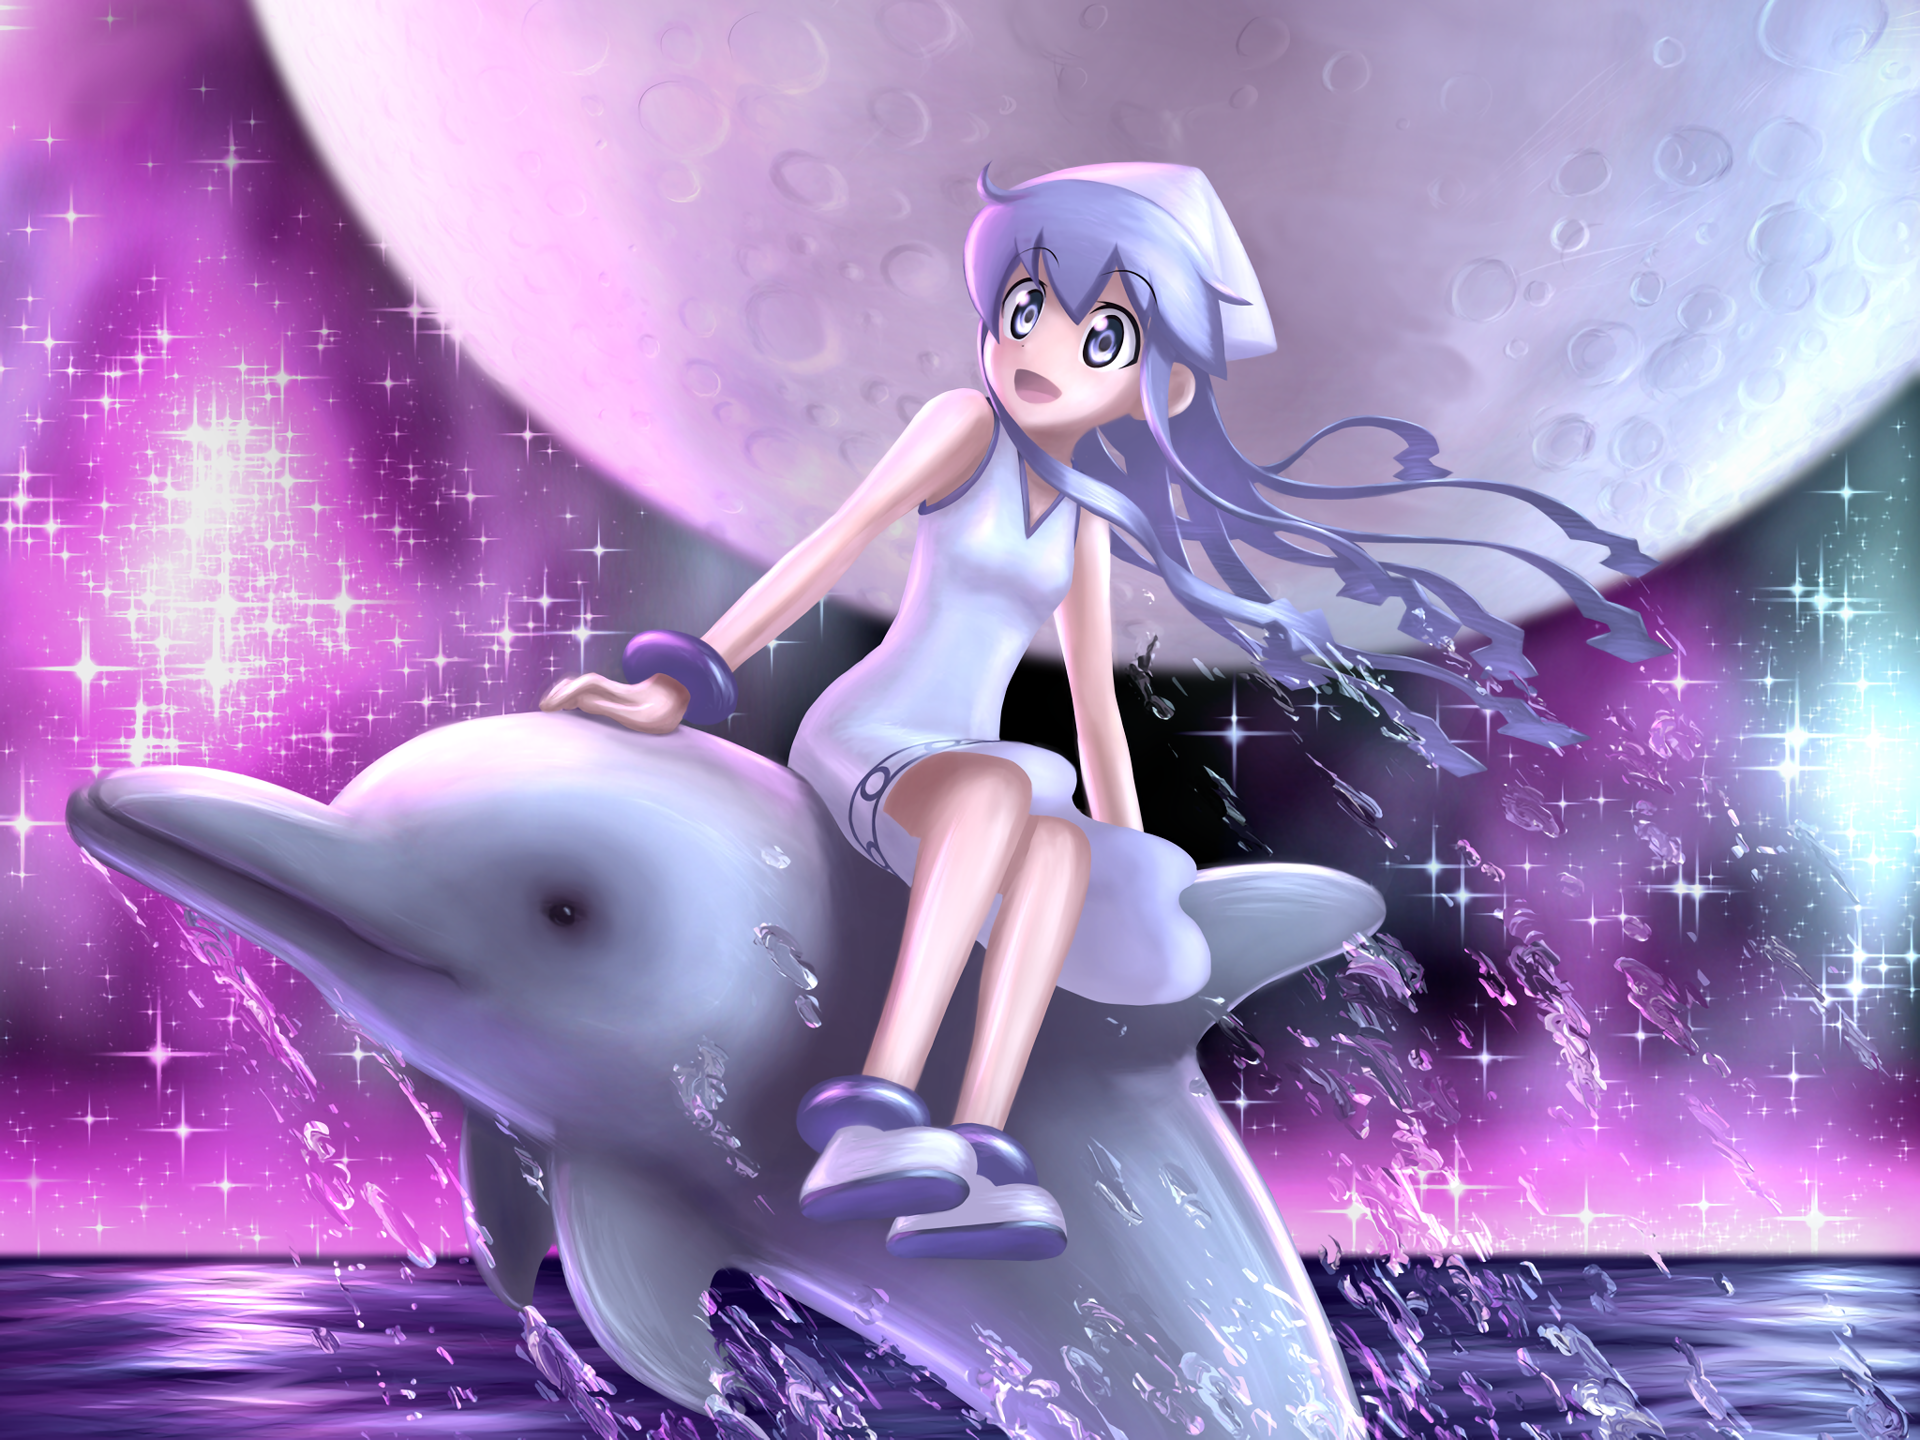 Cute kawaii clipart of a dolphin, full body, friendly, anime style,soft  color blending, rounded, n